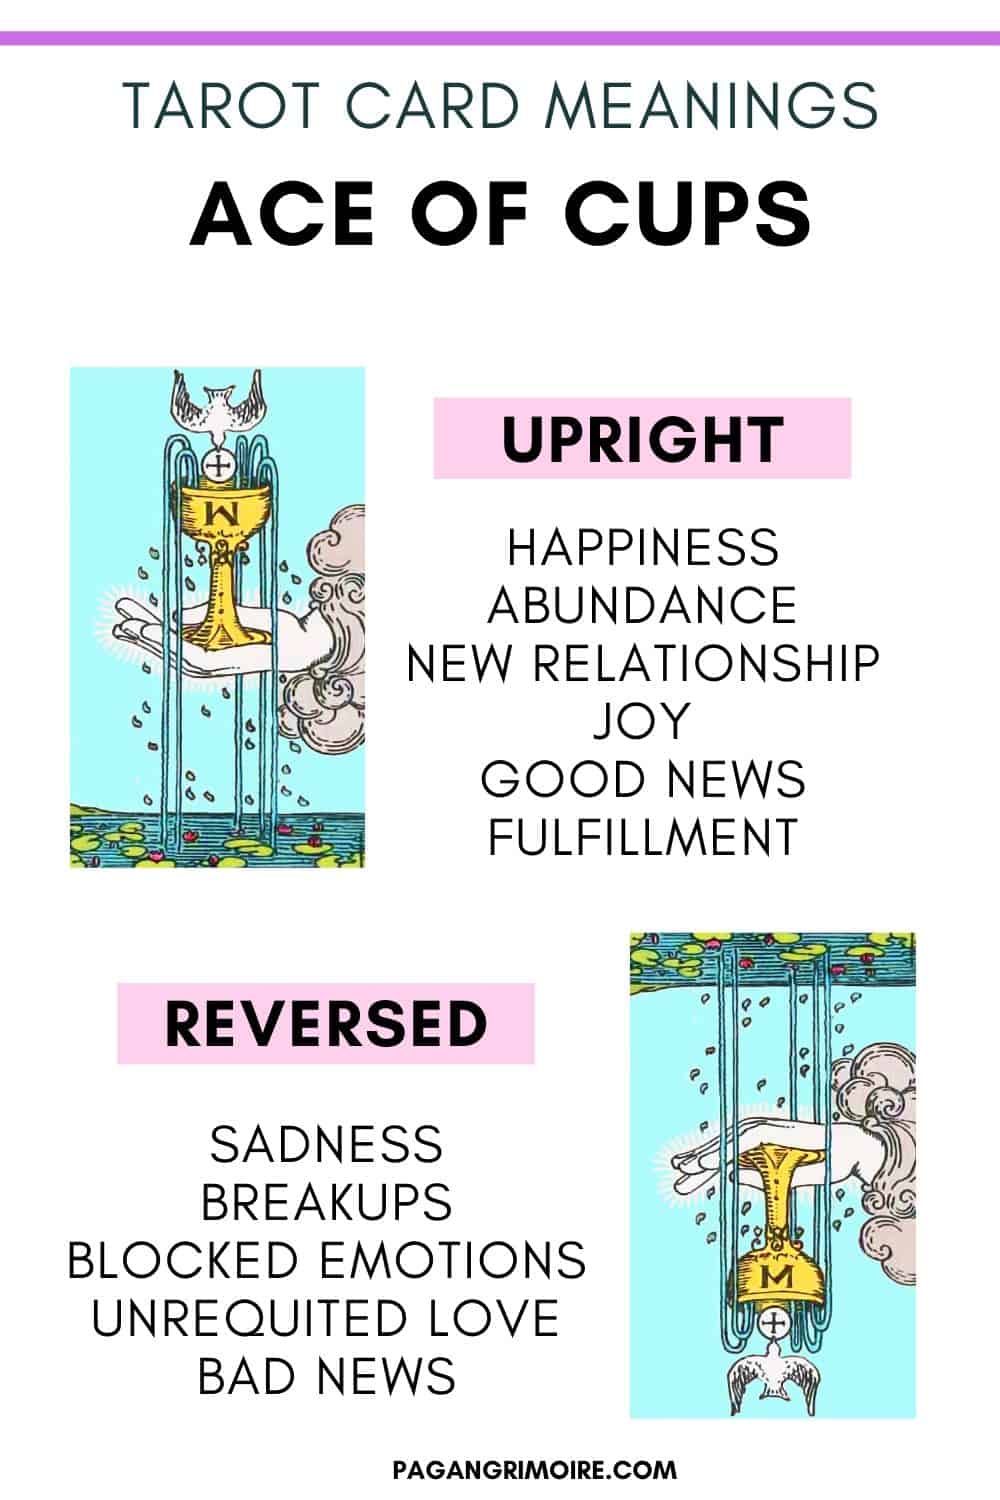 Ace of Cups - Tarot Meanings